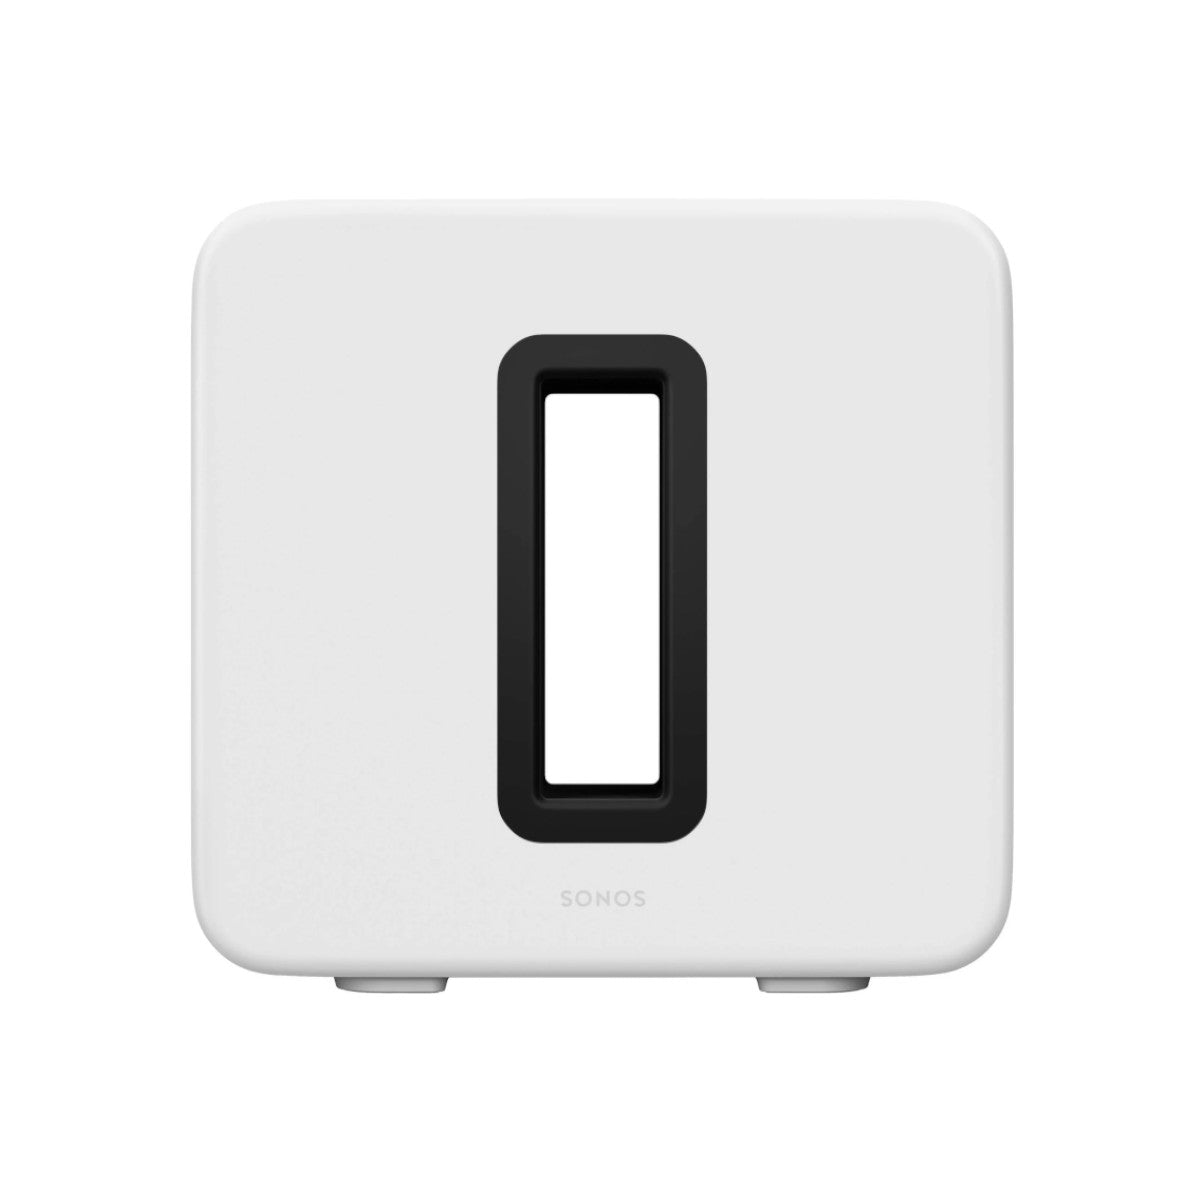 Sonos SUB Gen 3 Wireless Subwoofer (White) - Ooberpad India